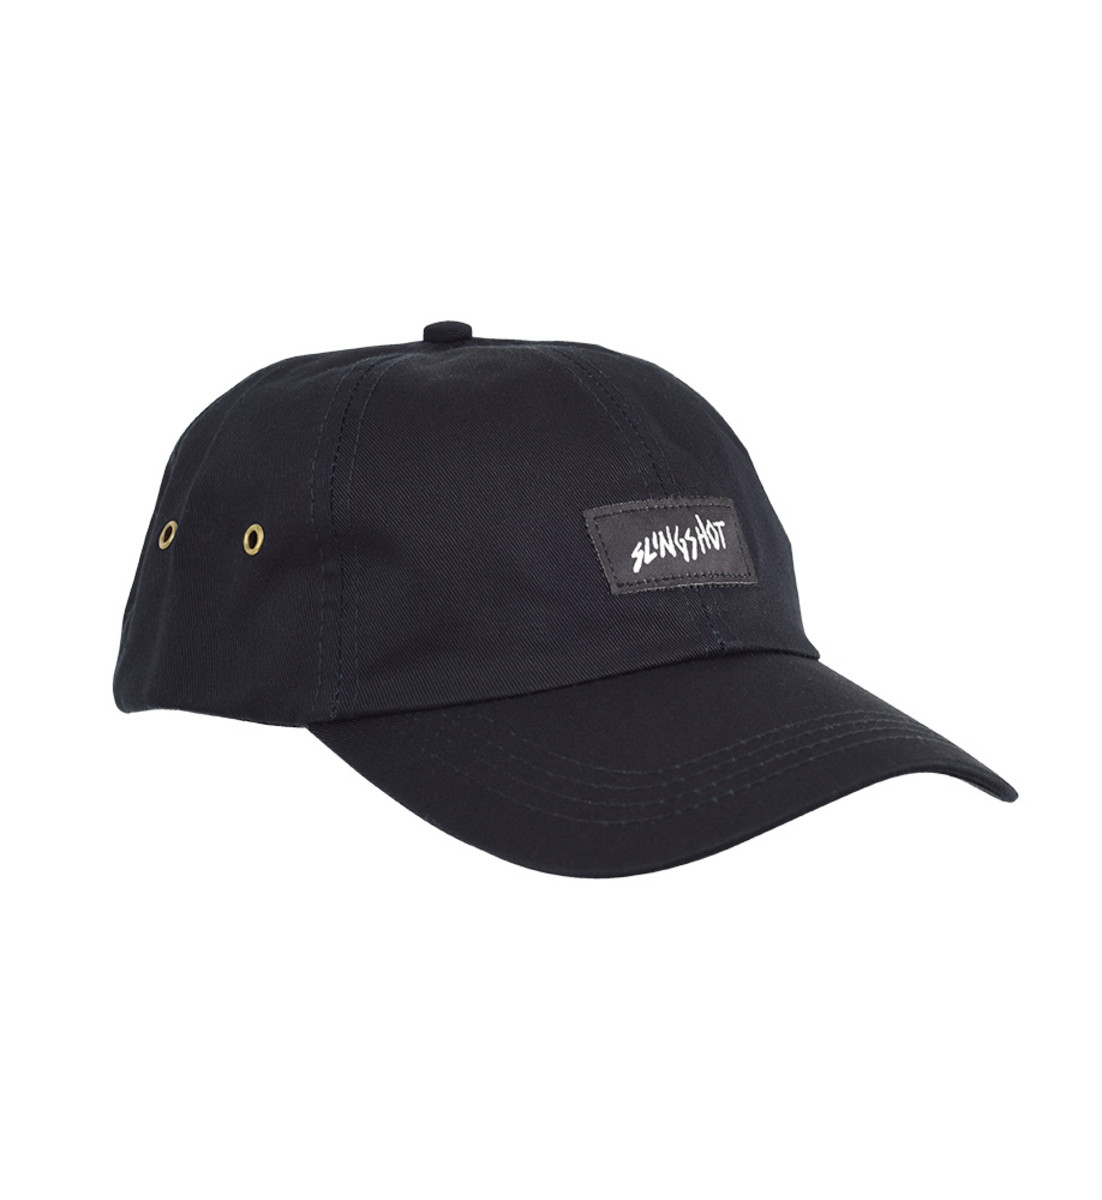 SHOT AND ROLL HAT